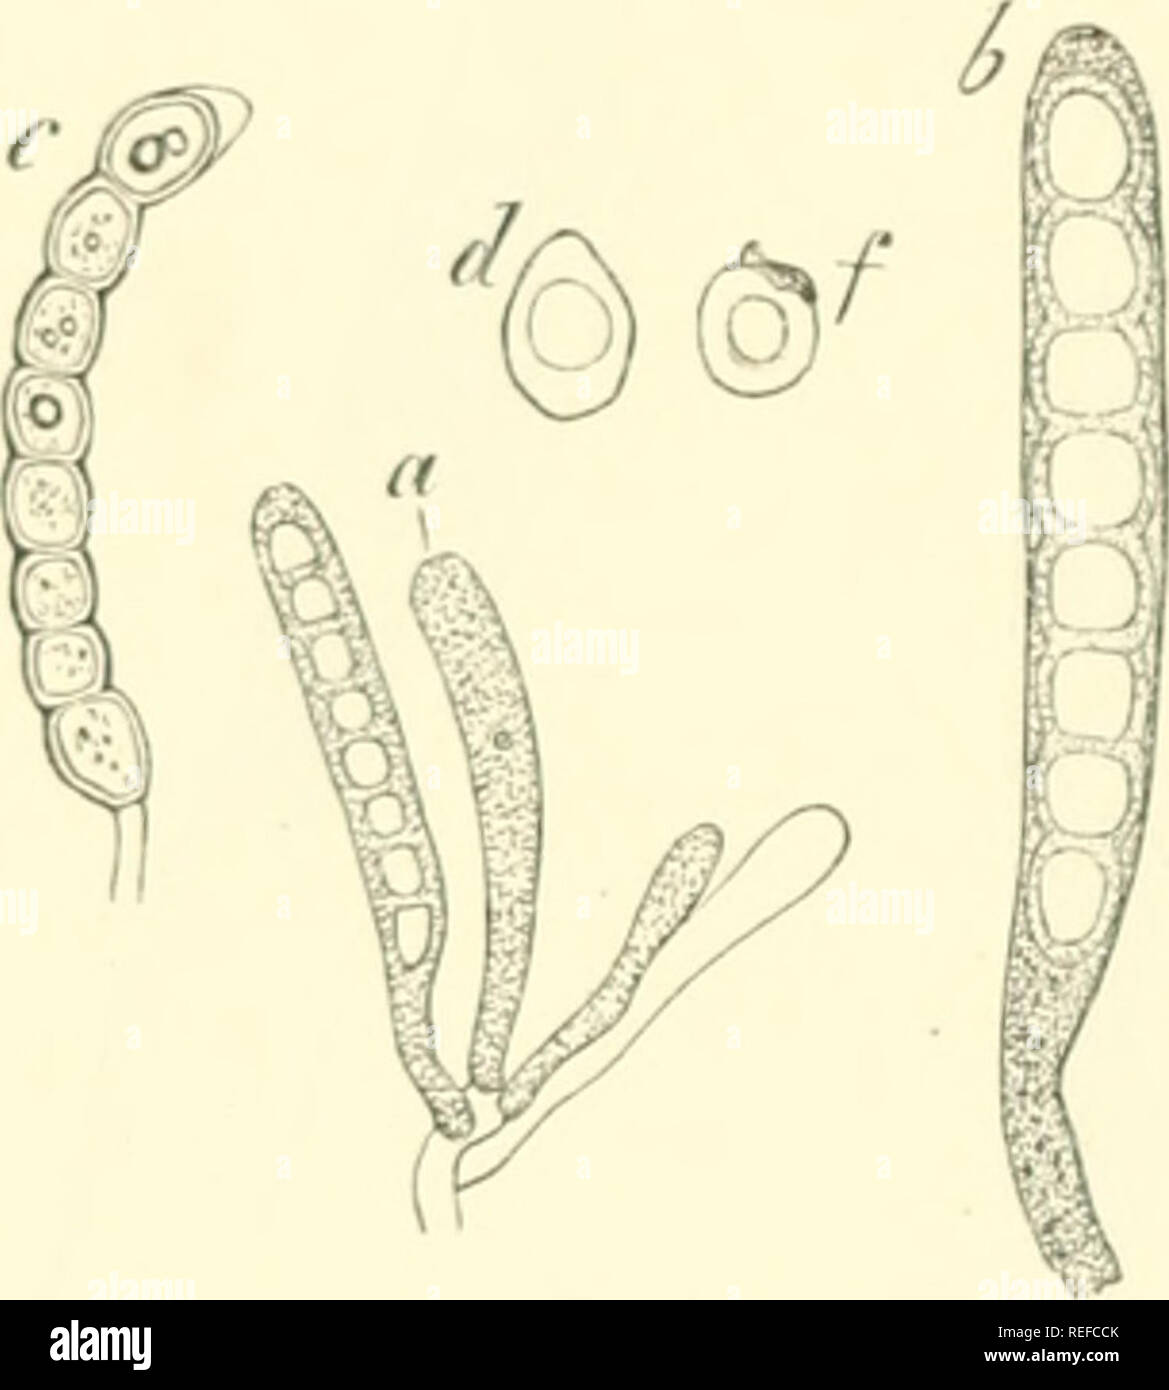 . Comparative morphology and biology of the fungi, mycetozoa and bacteria. Fungi -- Morphology; Bacteria -- Morphology. 96 DIVISION I. GENERAL MGRl'TIOLOGV. as it was described in Peziza Sclerotiorum, &amp;c. (Fig. 43i&gt; which is extended by stretching into a thin membrane, it becomes a question whether the thickenings in the cases we are considering arc not extended in the same way into thin membranes with the expansion of the ascus, and arc to In- i on si d&lt; red therefore as reserve-pieces of membrane destined to be extended and to assist in the ejection of the spores, and comparable wi Stock Photo